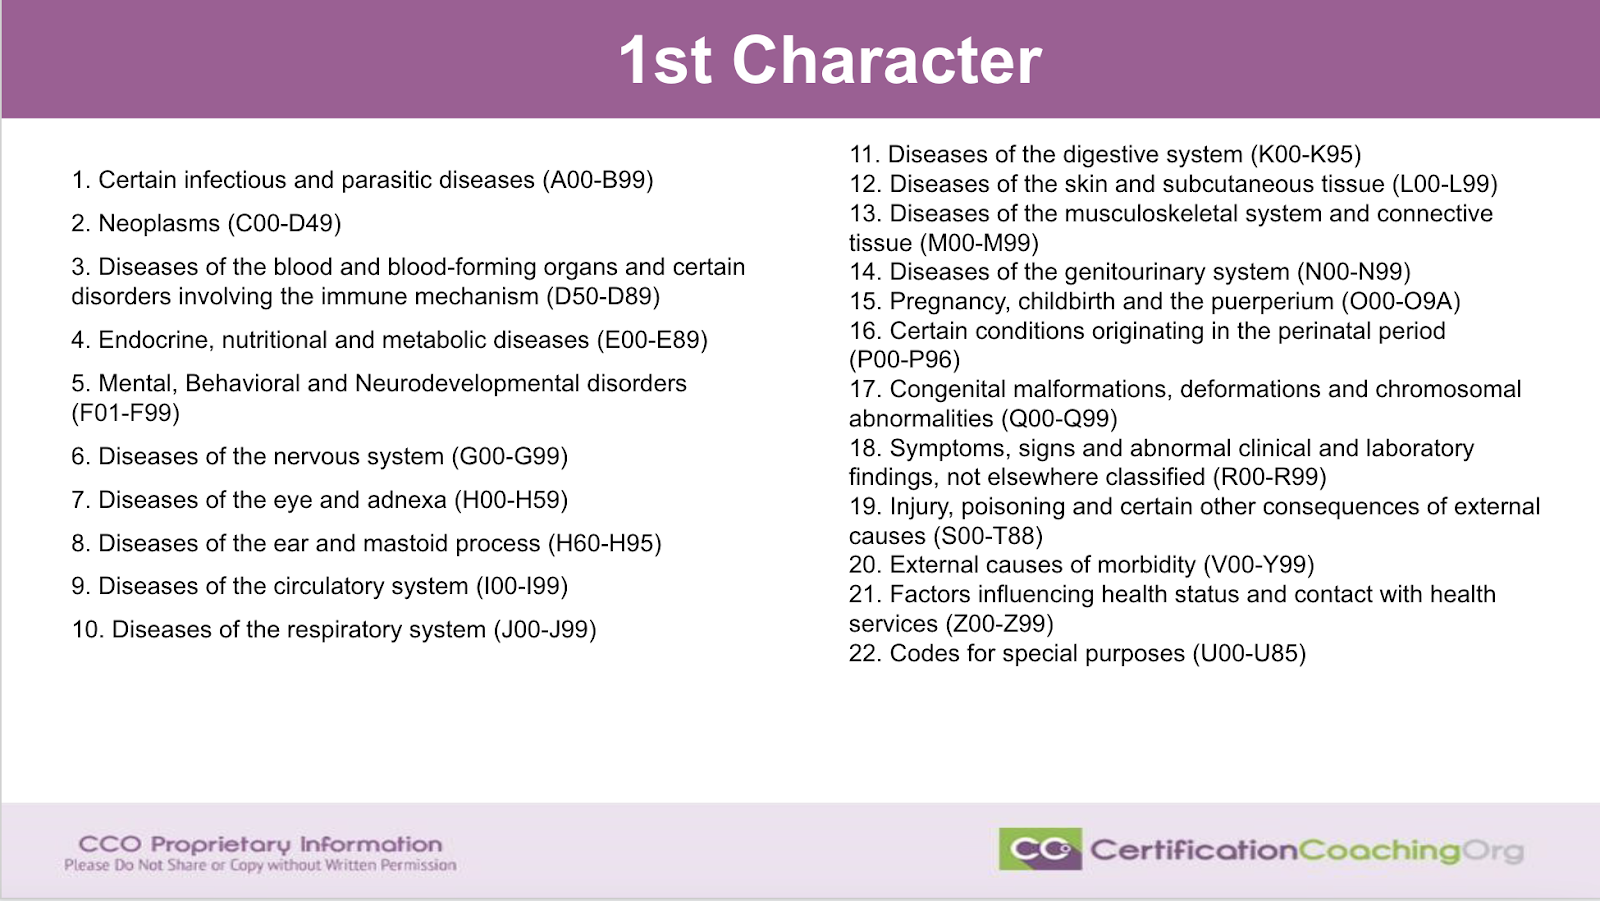 1st Character ICD-10